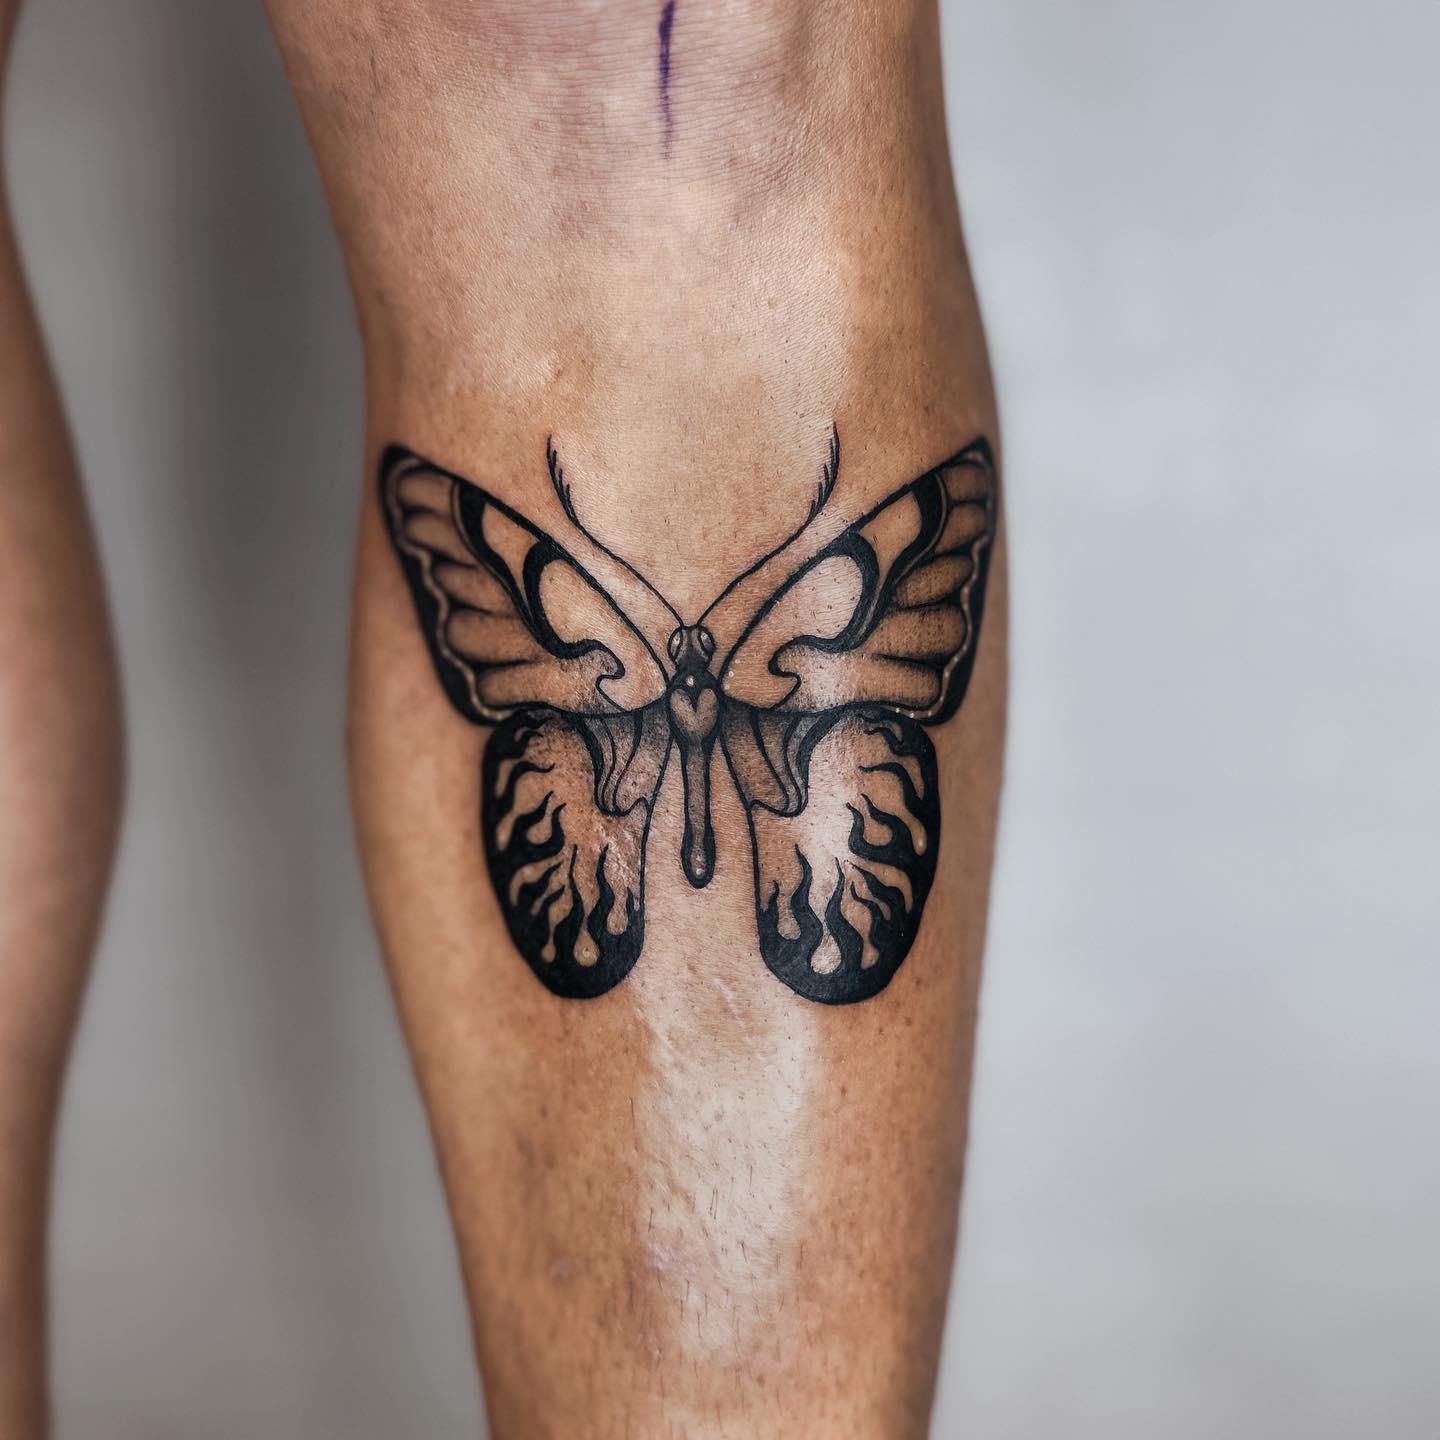 Butterfly Tattoo Designs and Meanings - 80 Ideas From Tattoo Artists`Instagrams